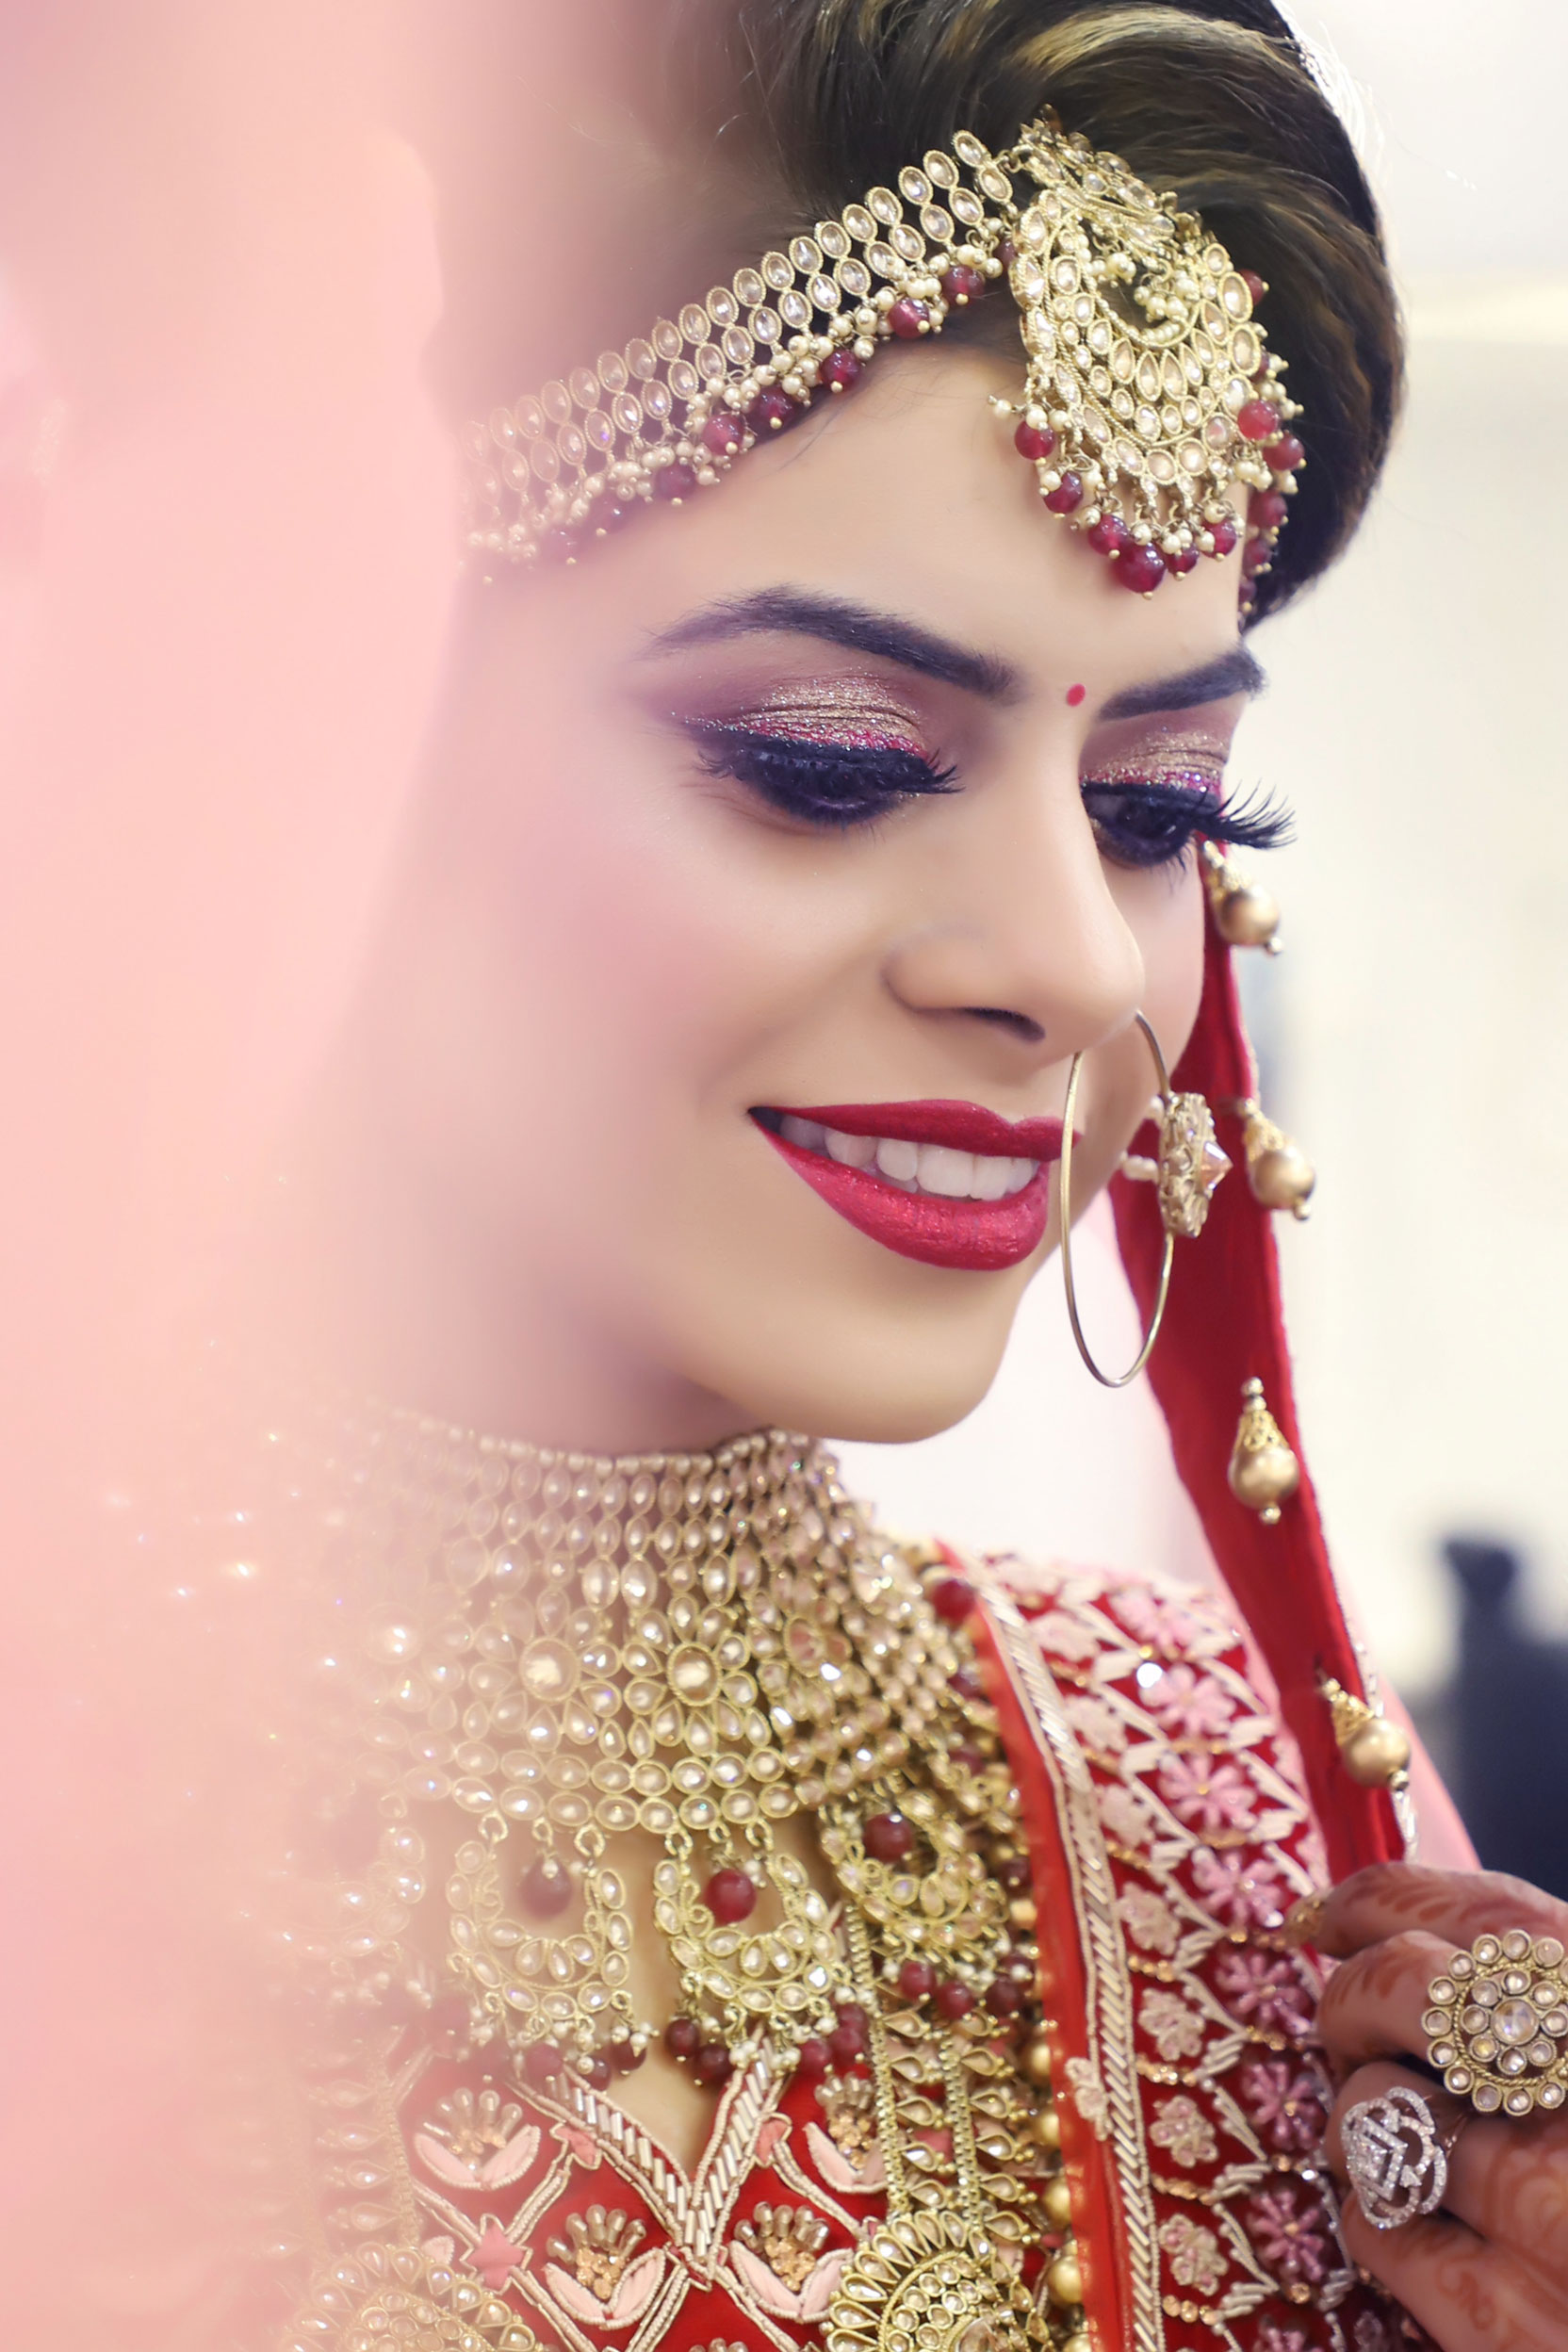 Latest Bridal Makeup Tips From the Industry Experts 